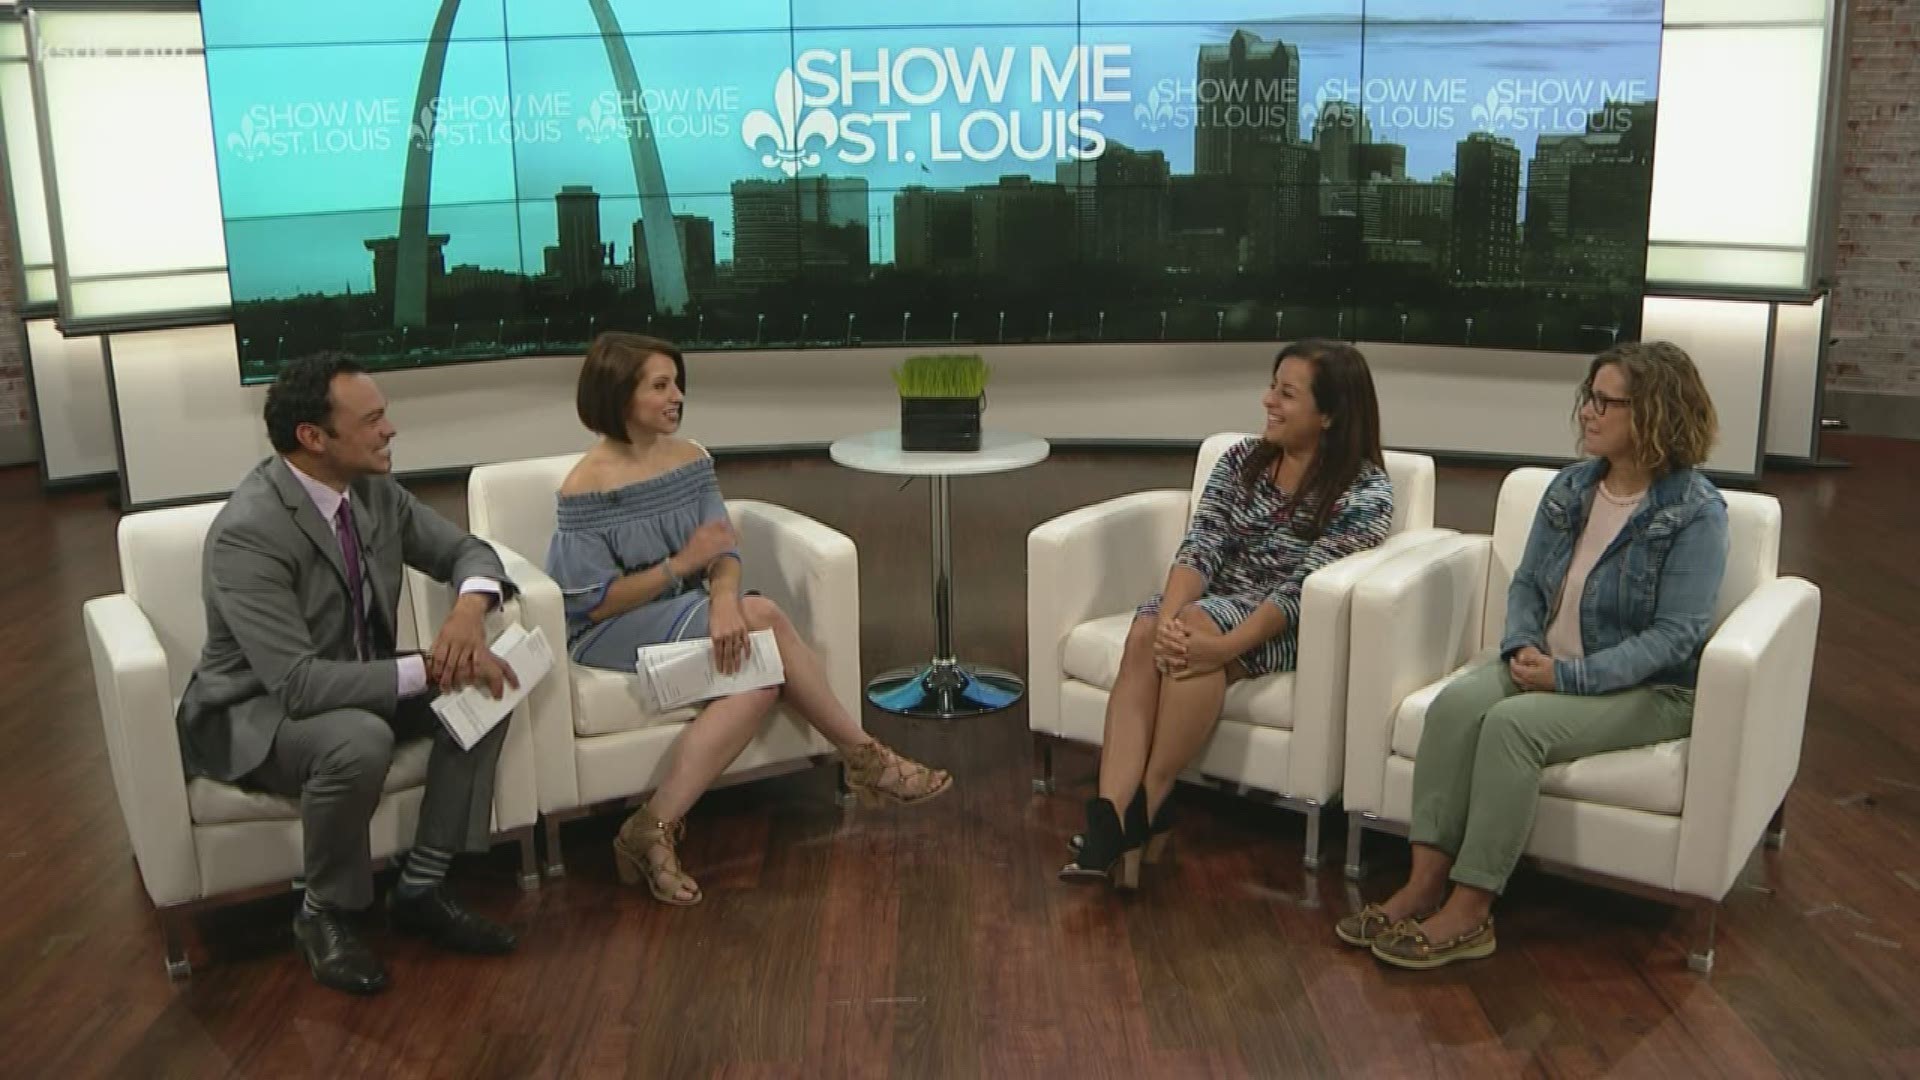 Dr. Katherine Rivera and Tina Charron discuss parenthood when it comes to the over-committed child.